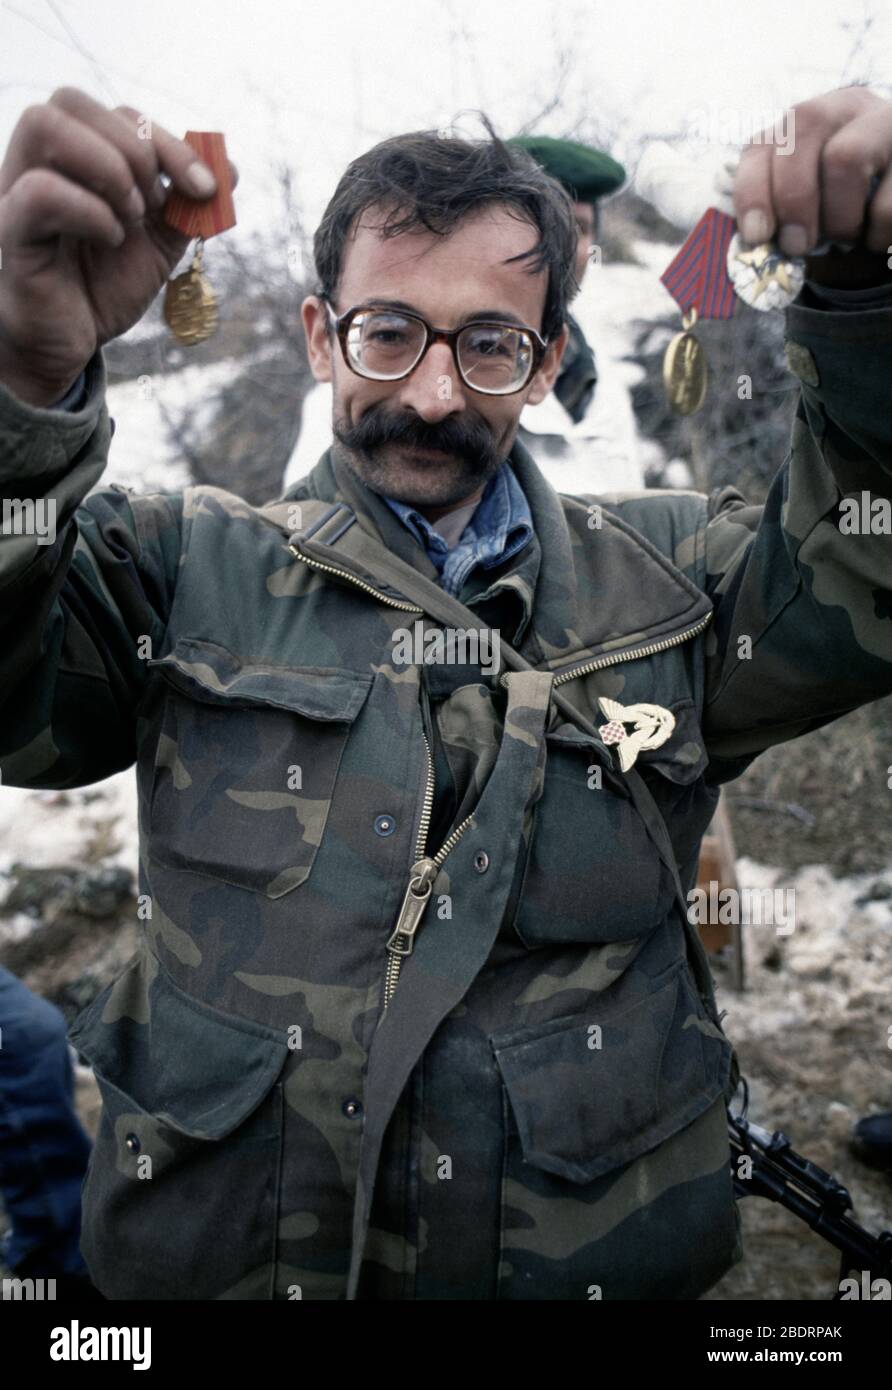 26th January 1994 During the war in central Bosnia: a victorious soldier of the HVO's Rama Brigade holds up military medals in the Bosnian Muslim village of Here, which was captured two days before. Stock Photo